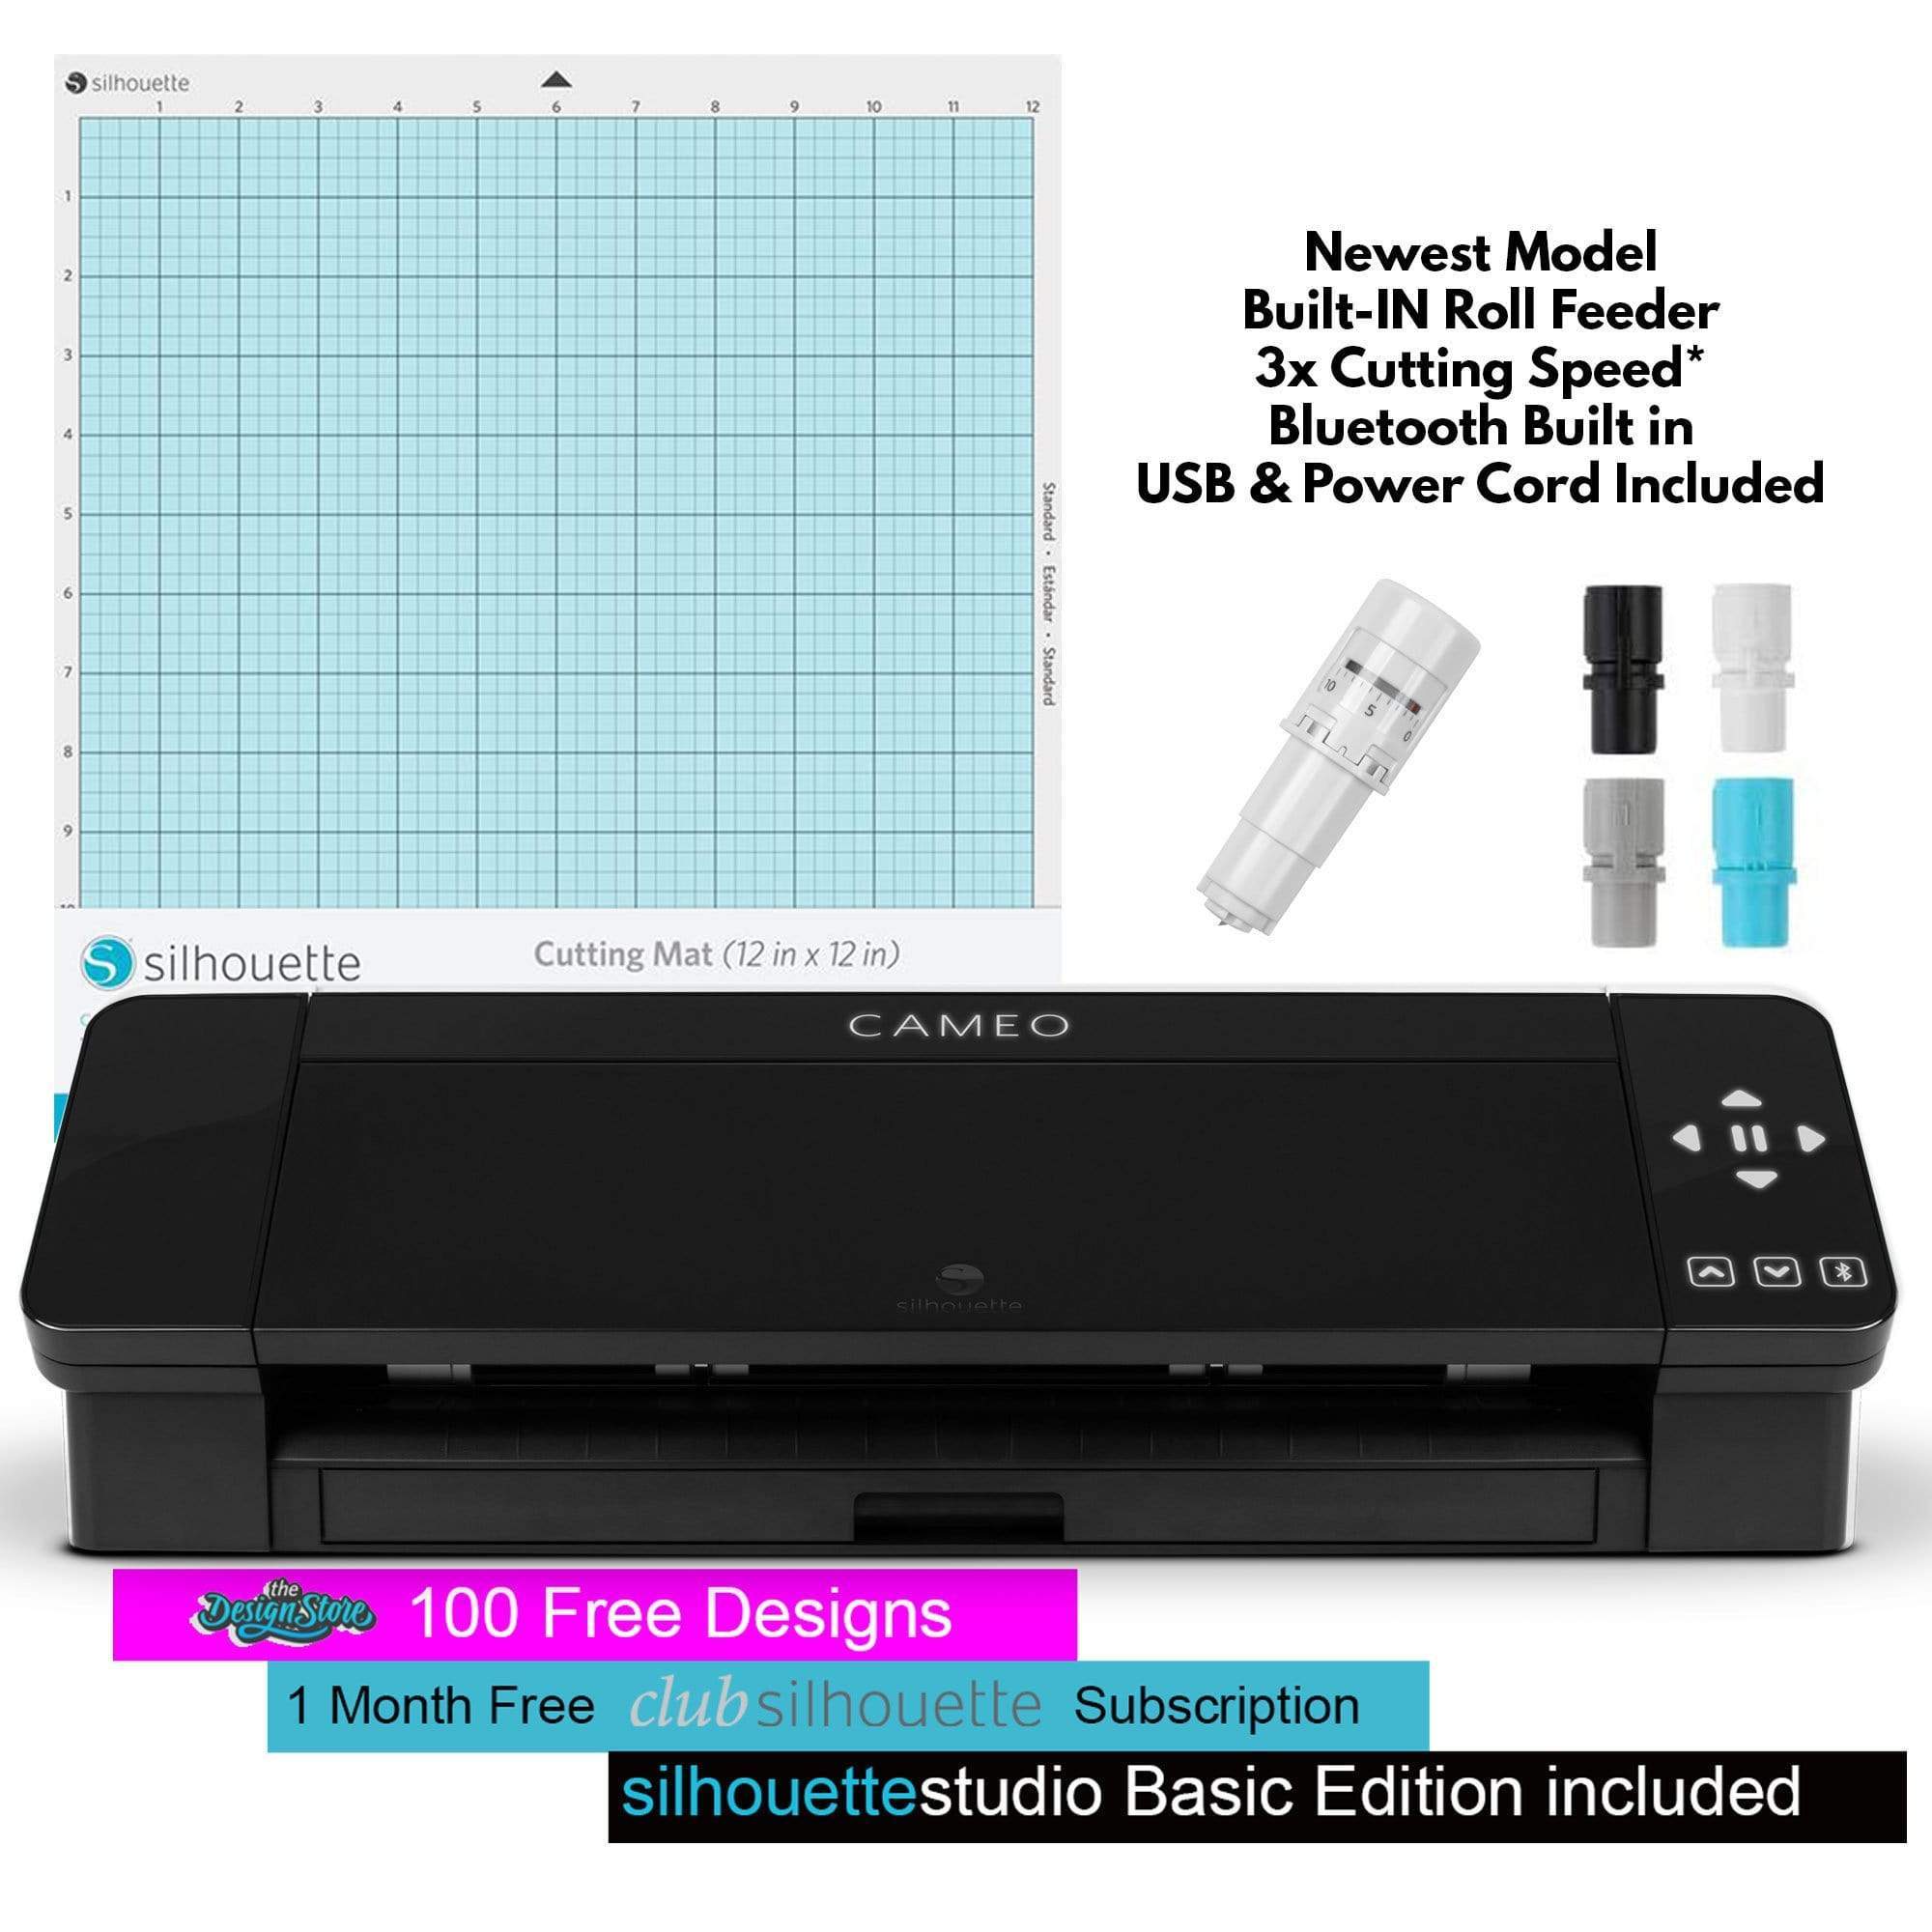 Silhouette Cameo 4 Electronic Cutter Black 819177022193